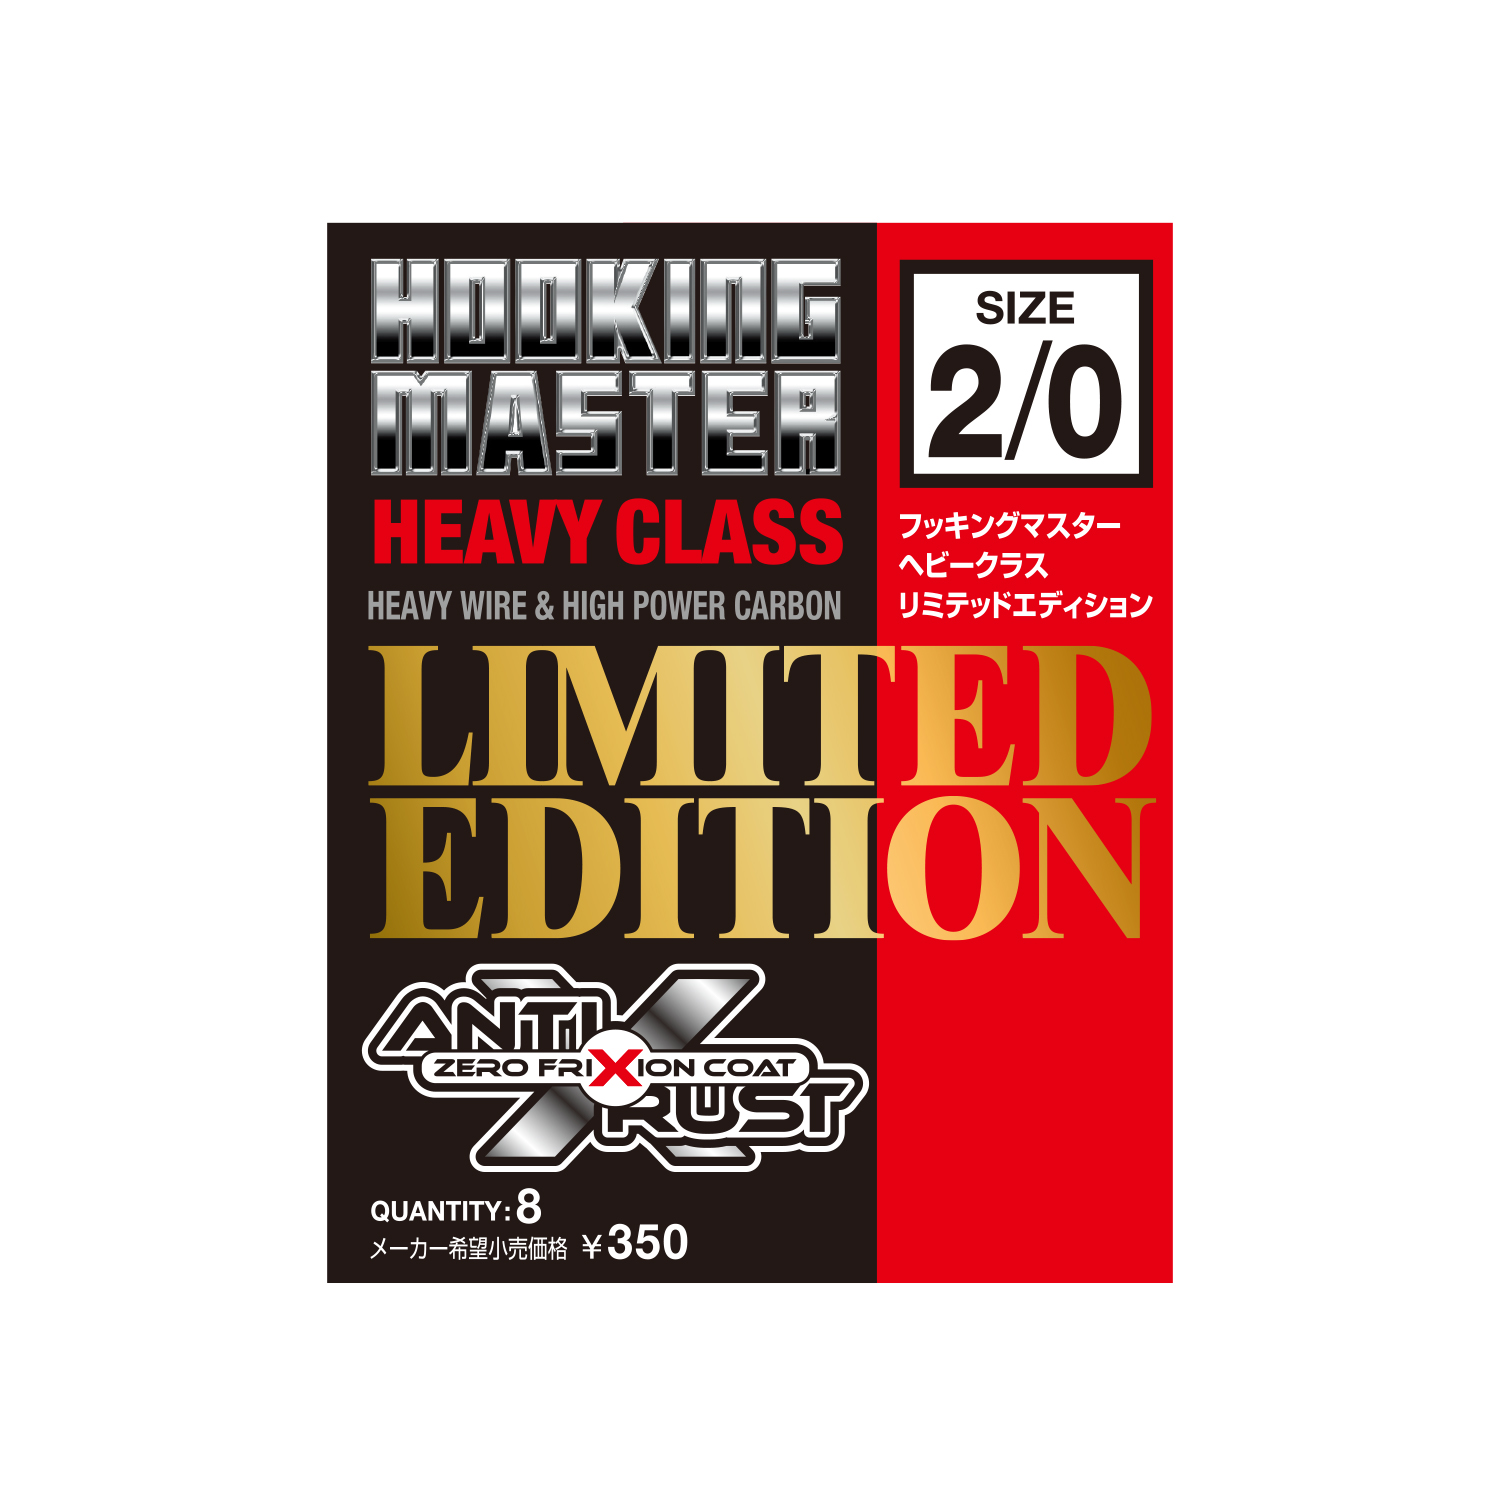 Nogales Hooking Master Limited Edition Heavy Class